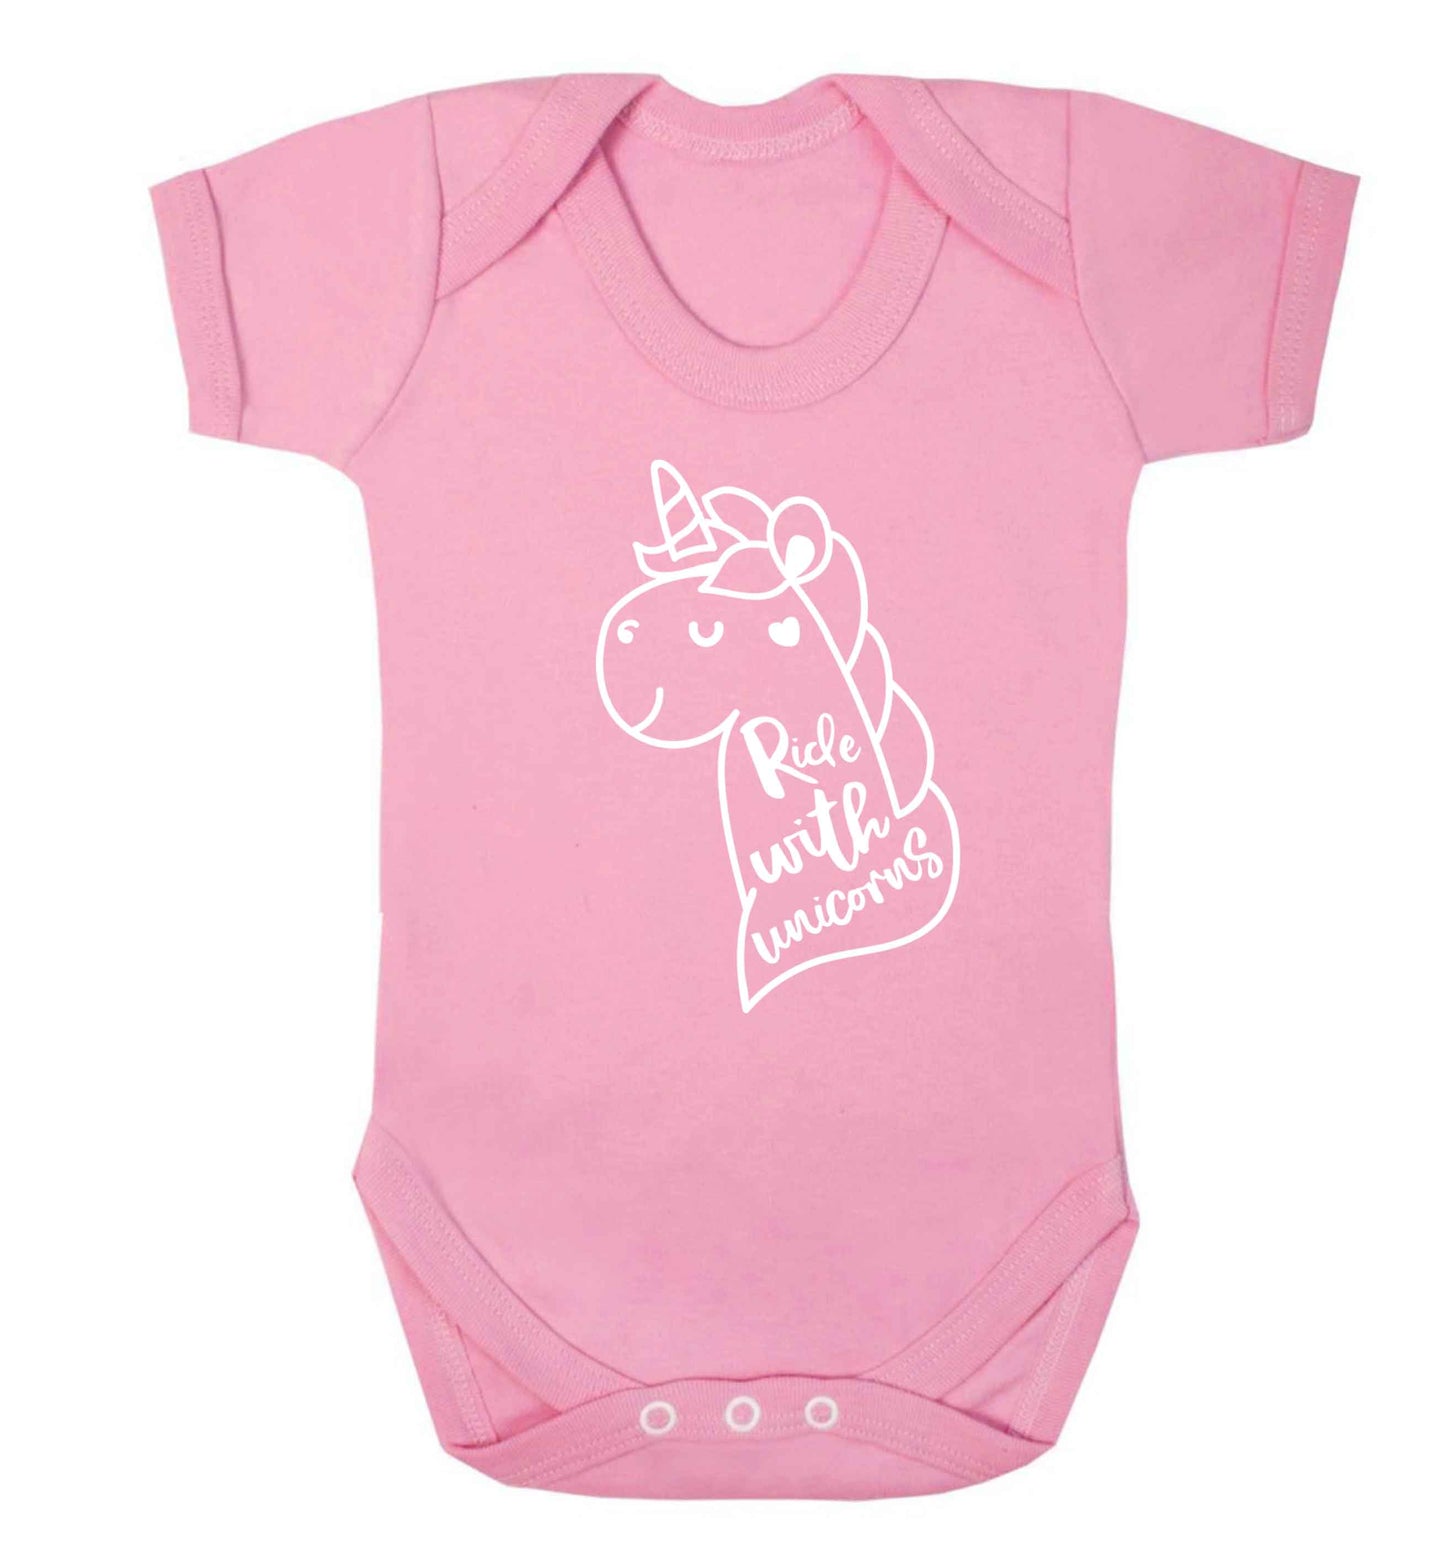 Ride with unicorns Baby Vest pale pink 18-24 months